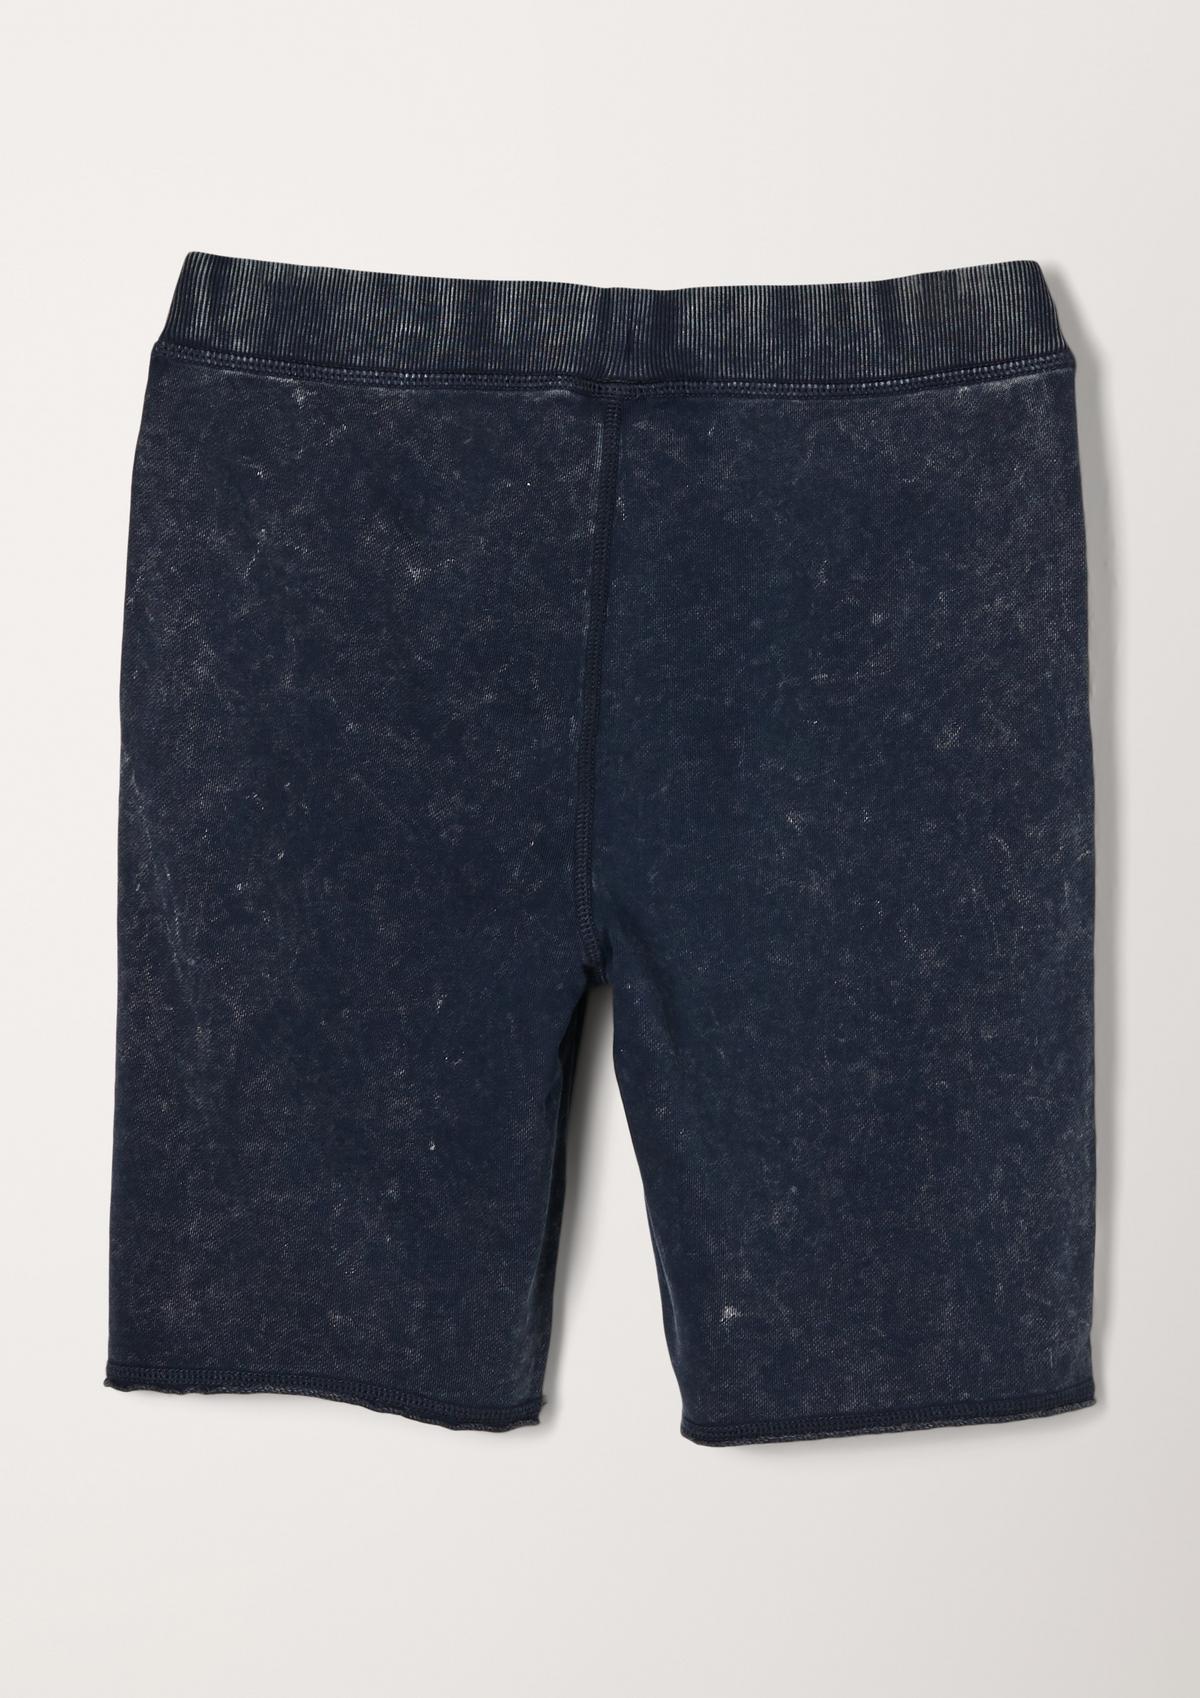 s.Oliver Relaxed fit: sweatshirt fabric Bermudas with a garment-washed effect